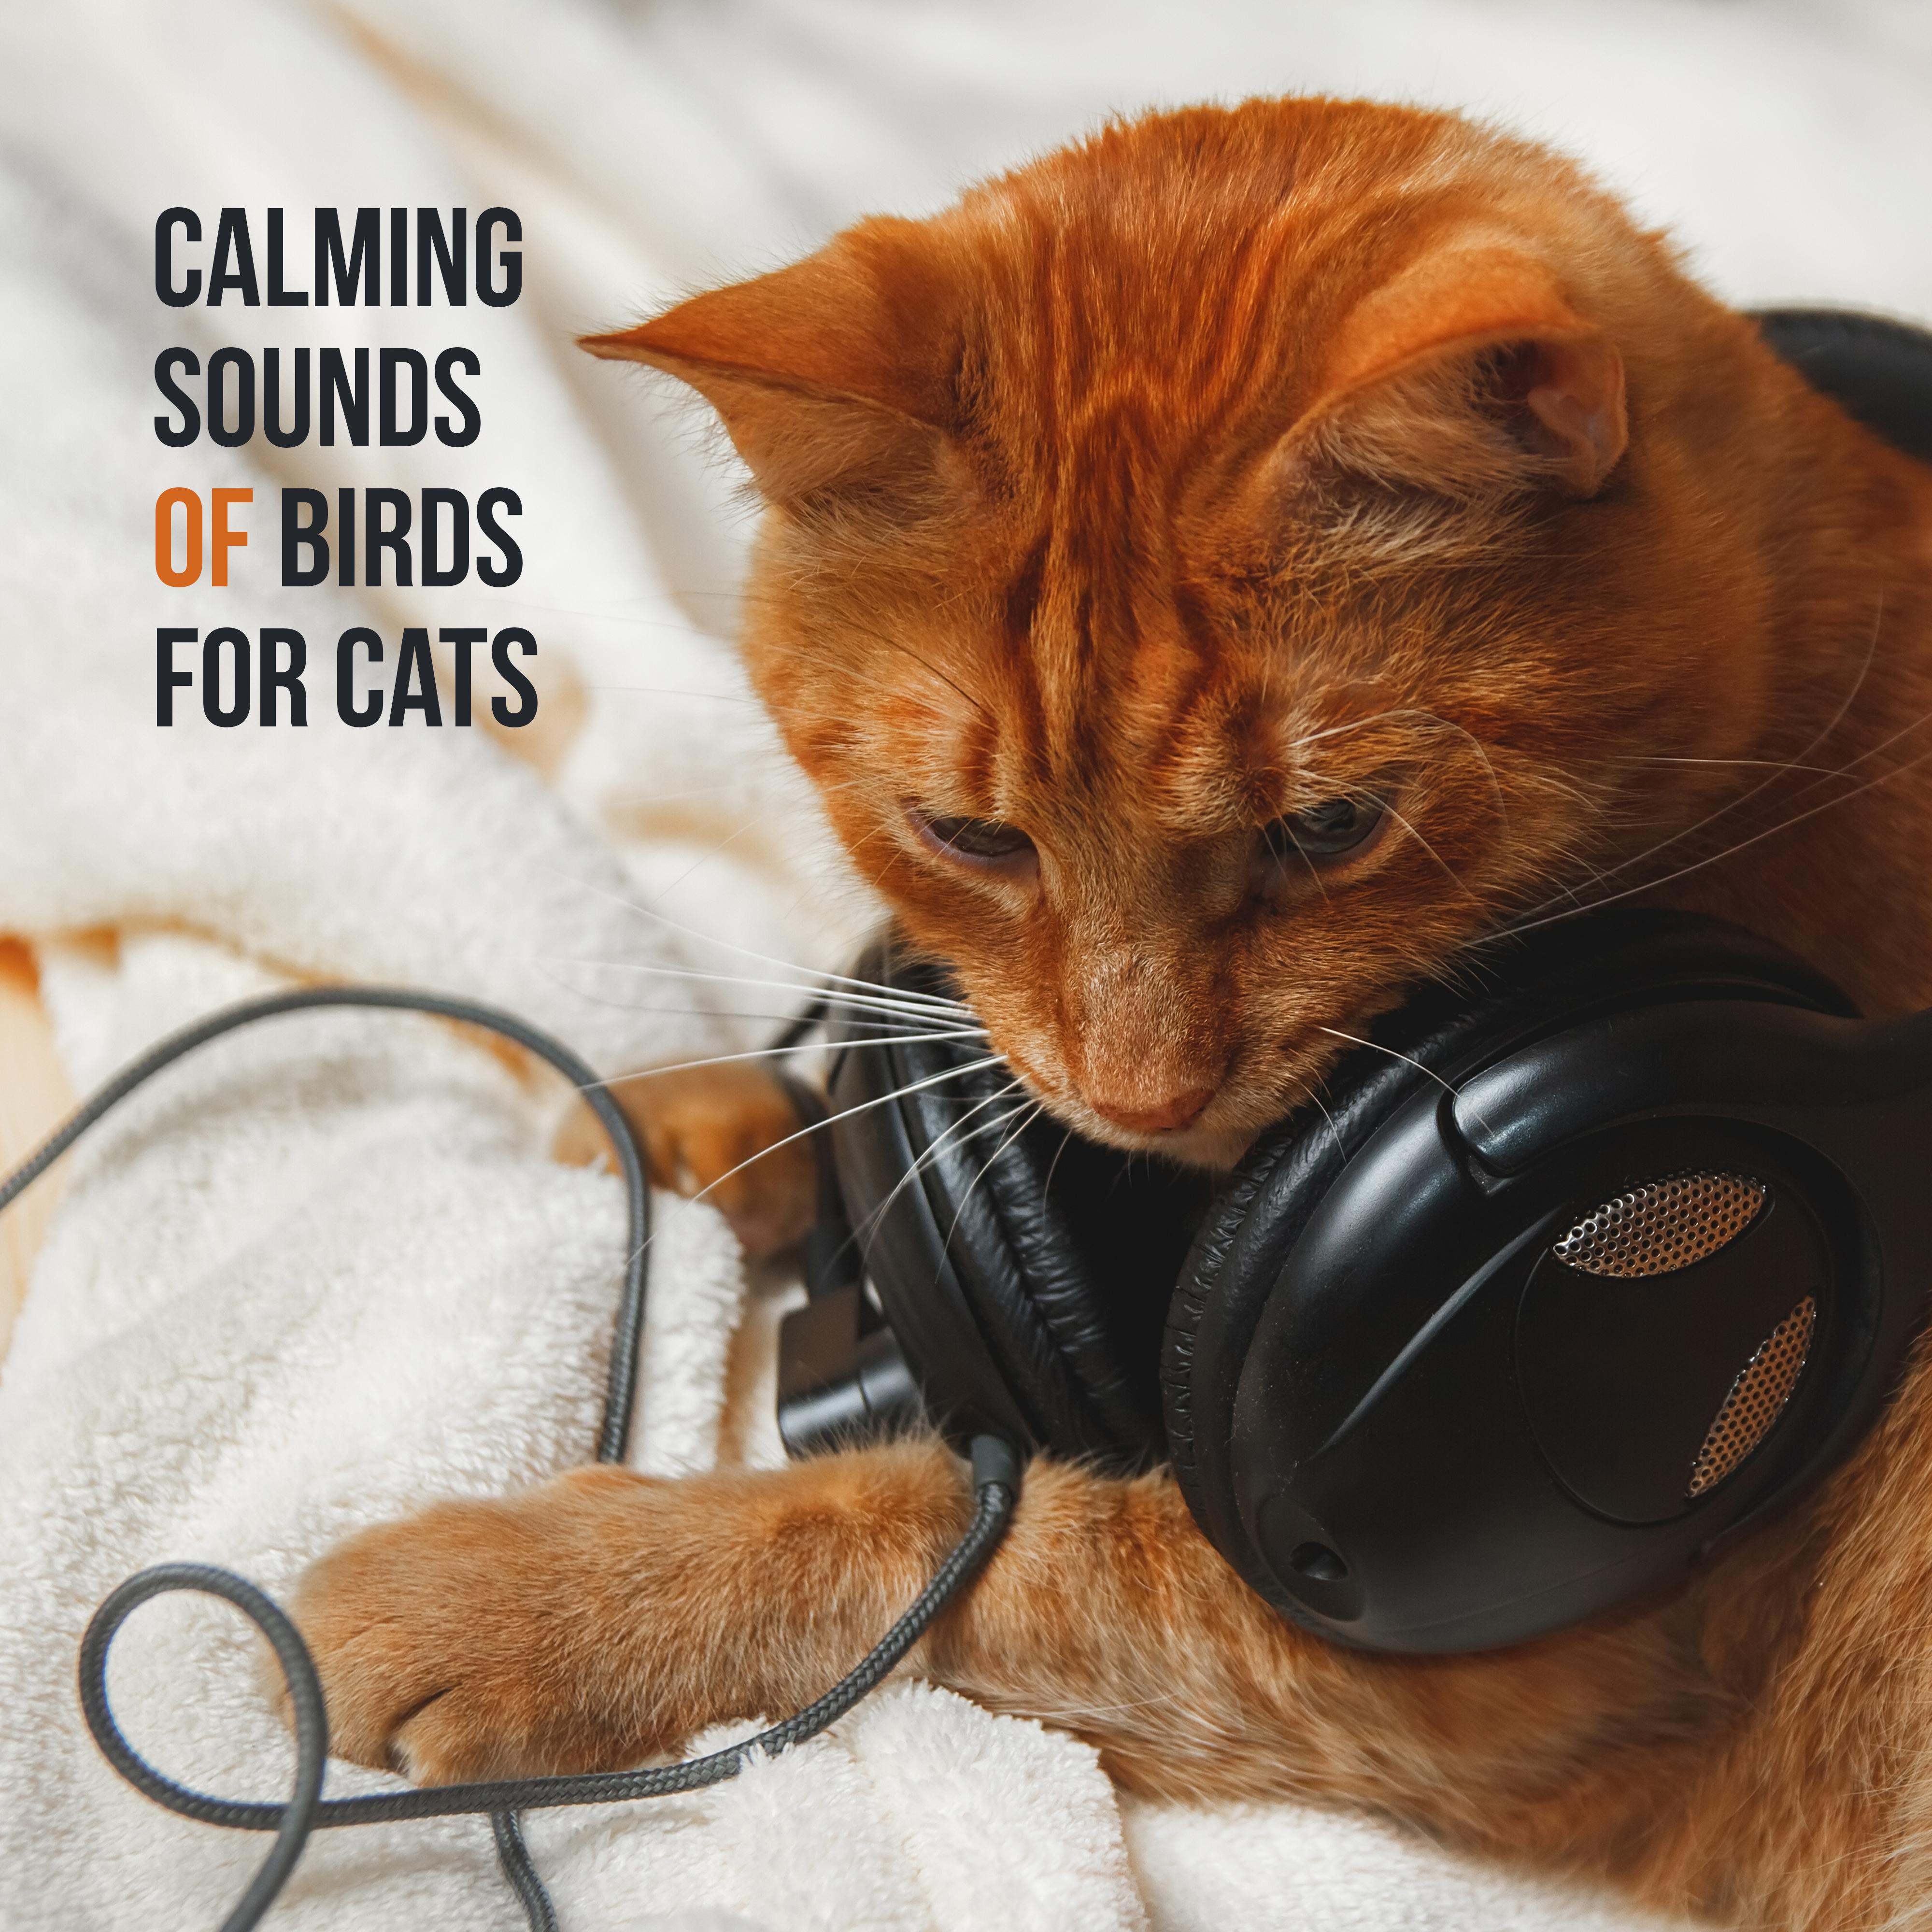 Calming Sounds of Birds for Cats – 15 Relaxing Sounds for Pets, Music for Cats, Deep Harmony, Nature Sounds, Relax & Sleep, Calm Down